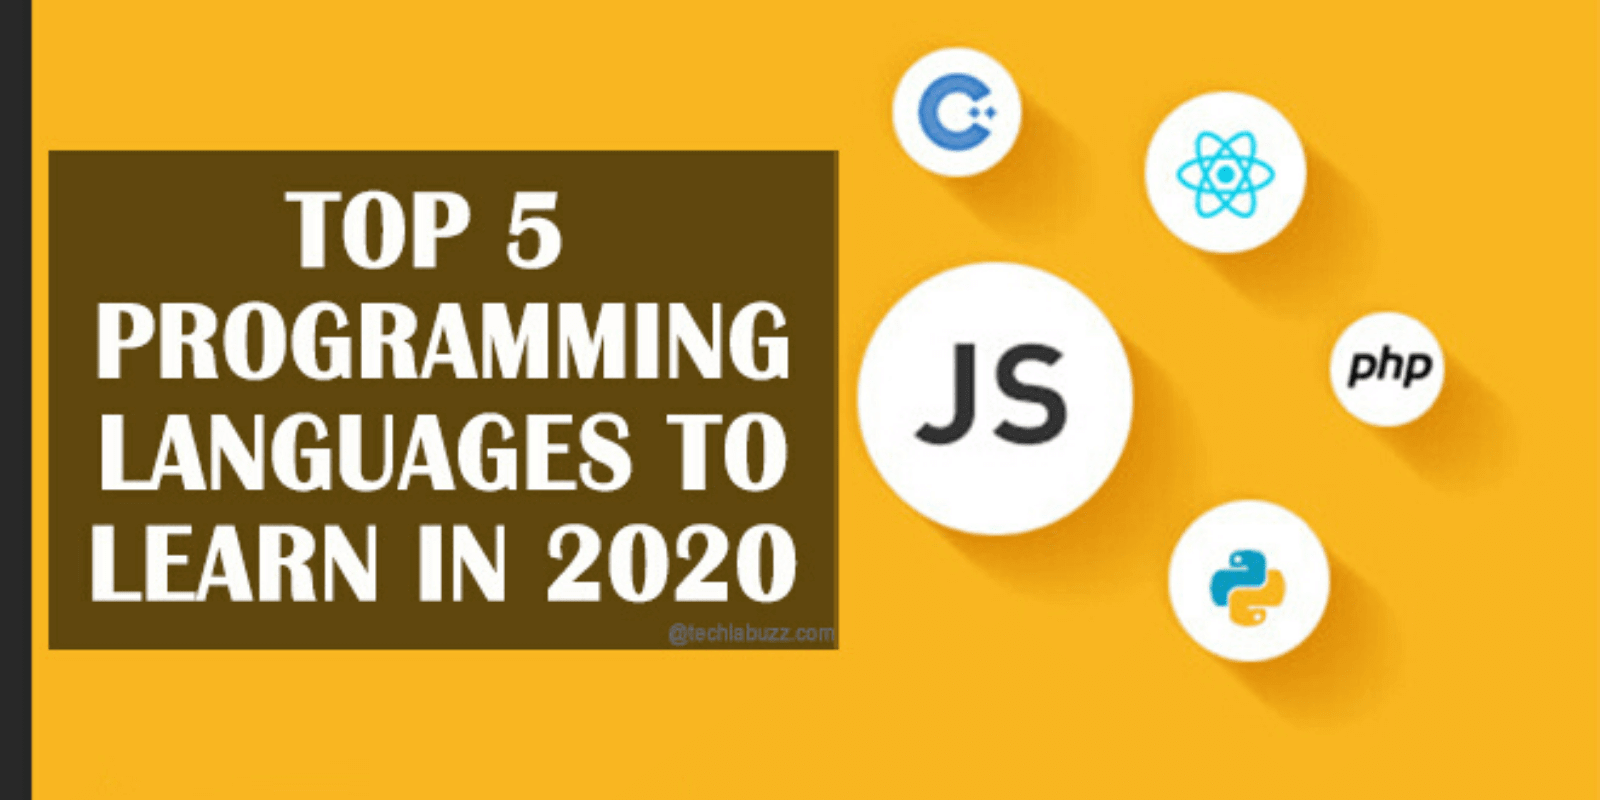 Top 5 programming languages to learn in 2020